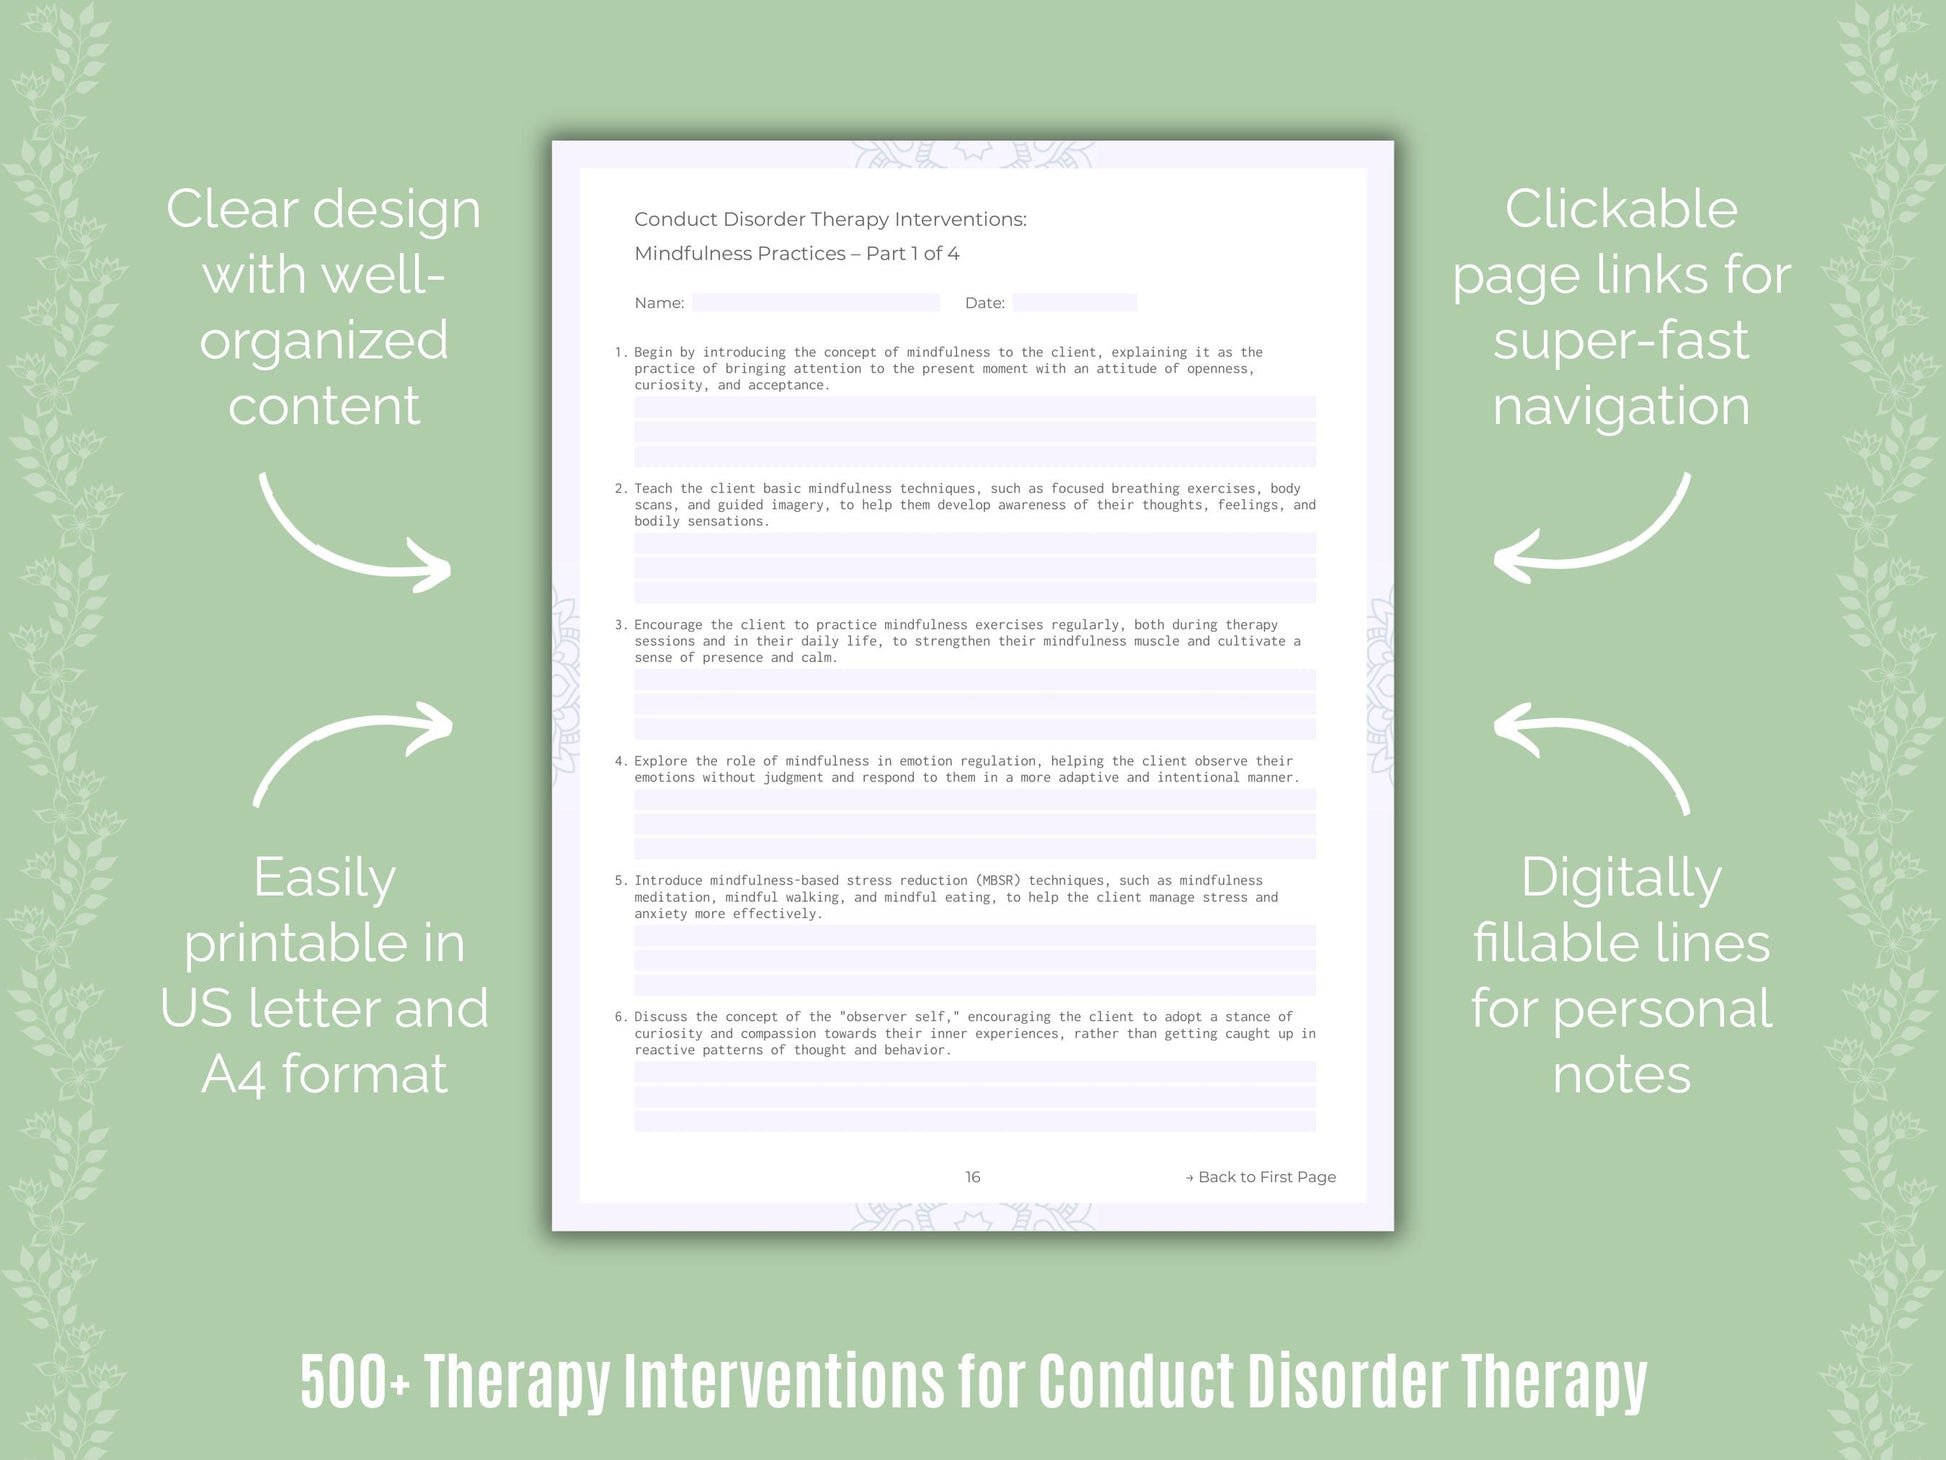 Conduct Disorder Therapy Interventions